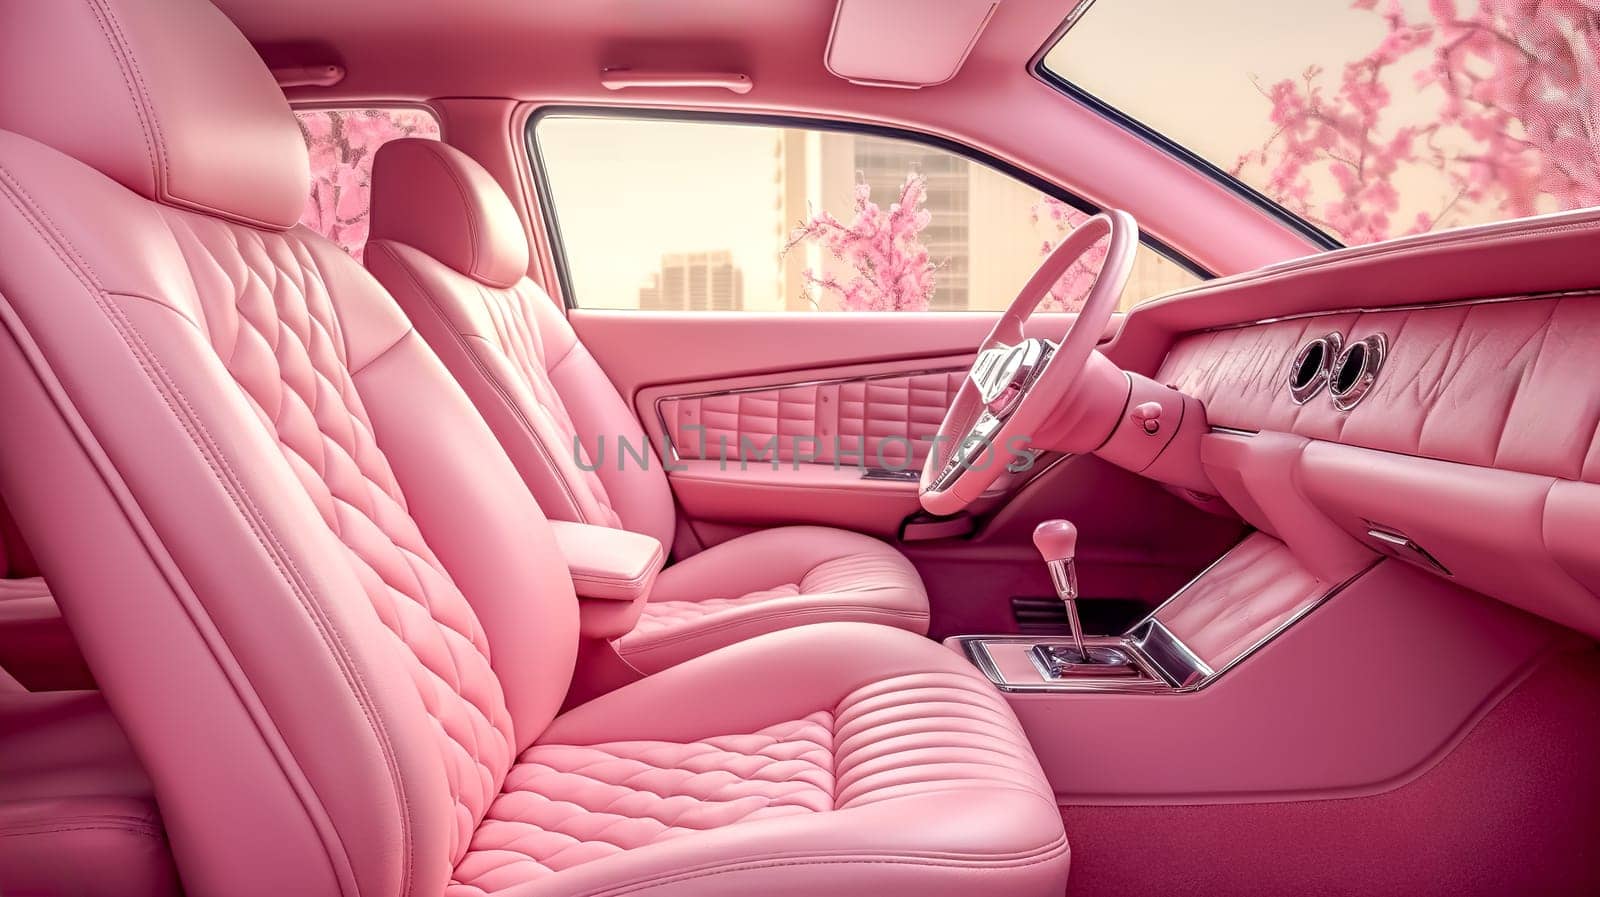 luxurious car interior boasts elegant pink upholstery, offering a blend of sophistication and modern style by Edophoto